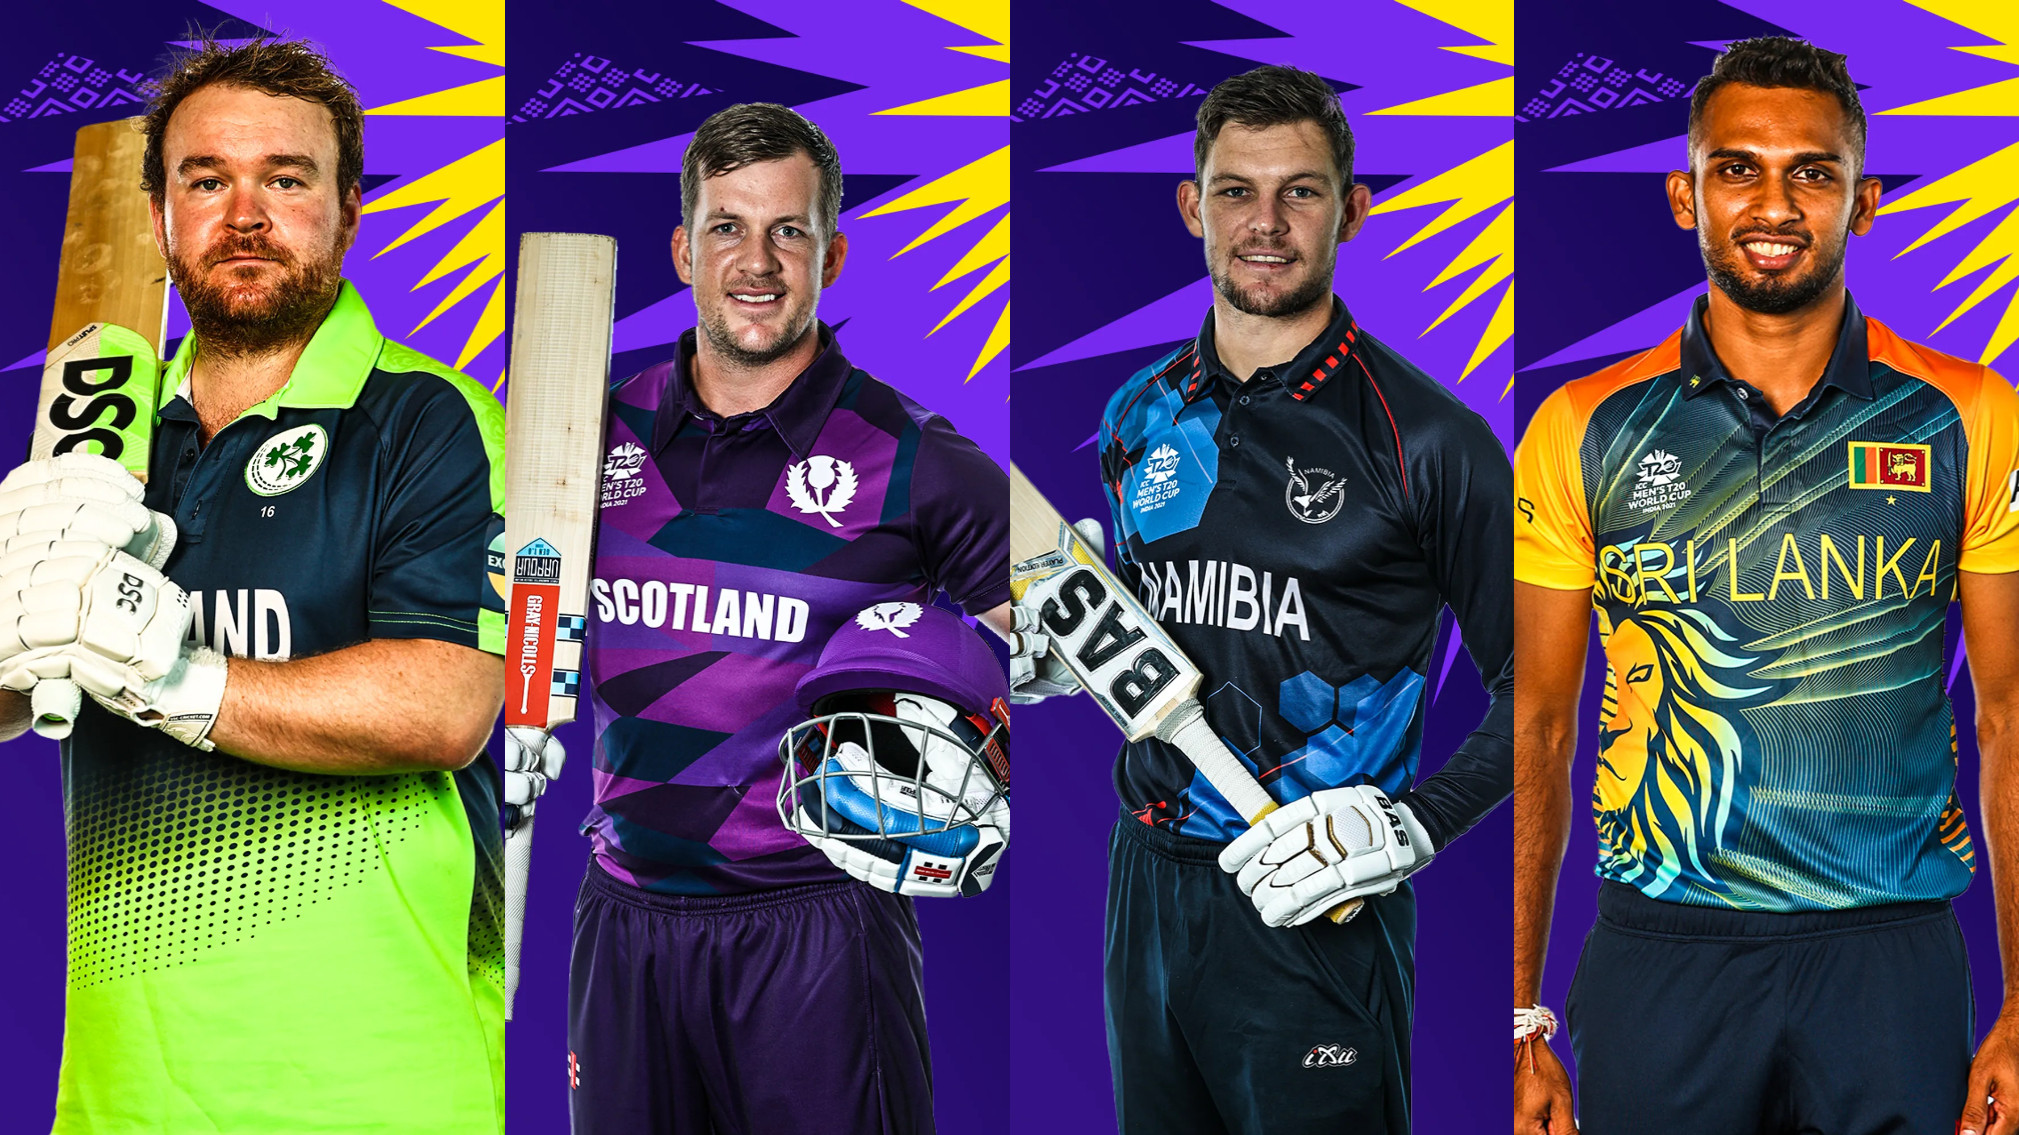 T20 World Cup 2021: PICS- Sri Lanka, Scotland, Ireland and Namibia jerseys for the ICC event